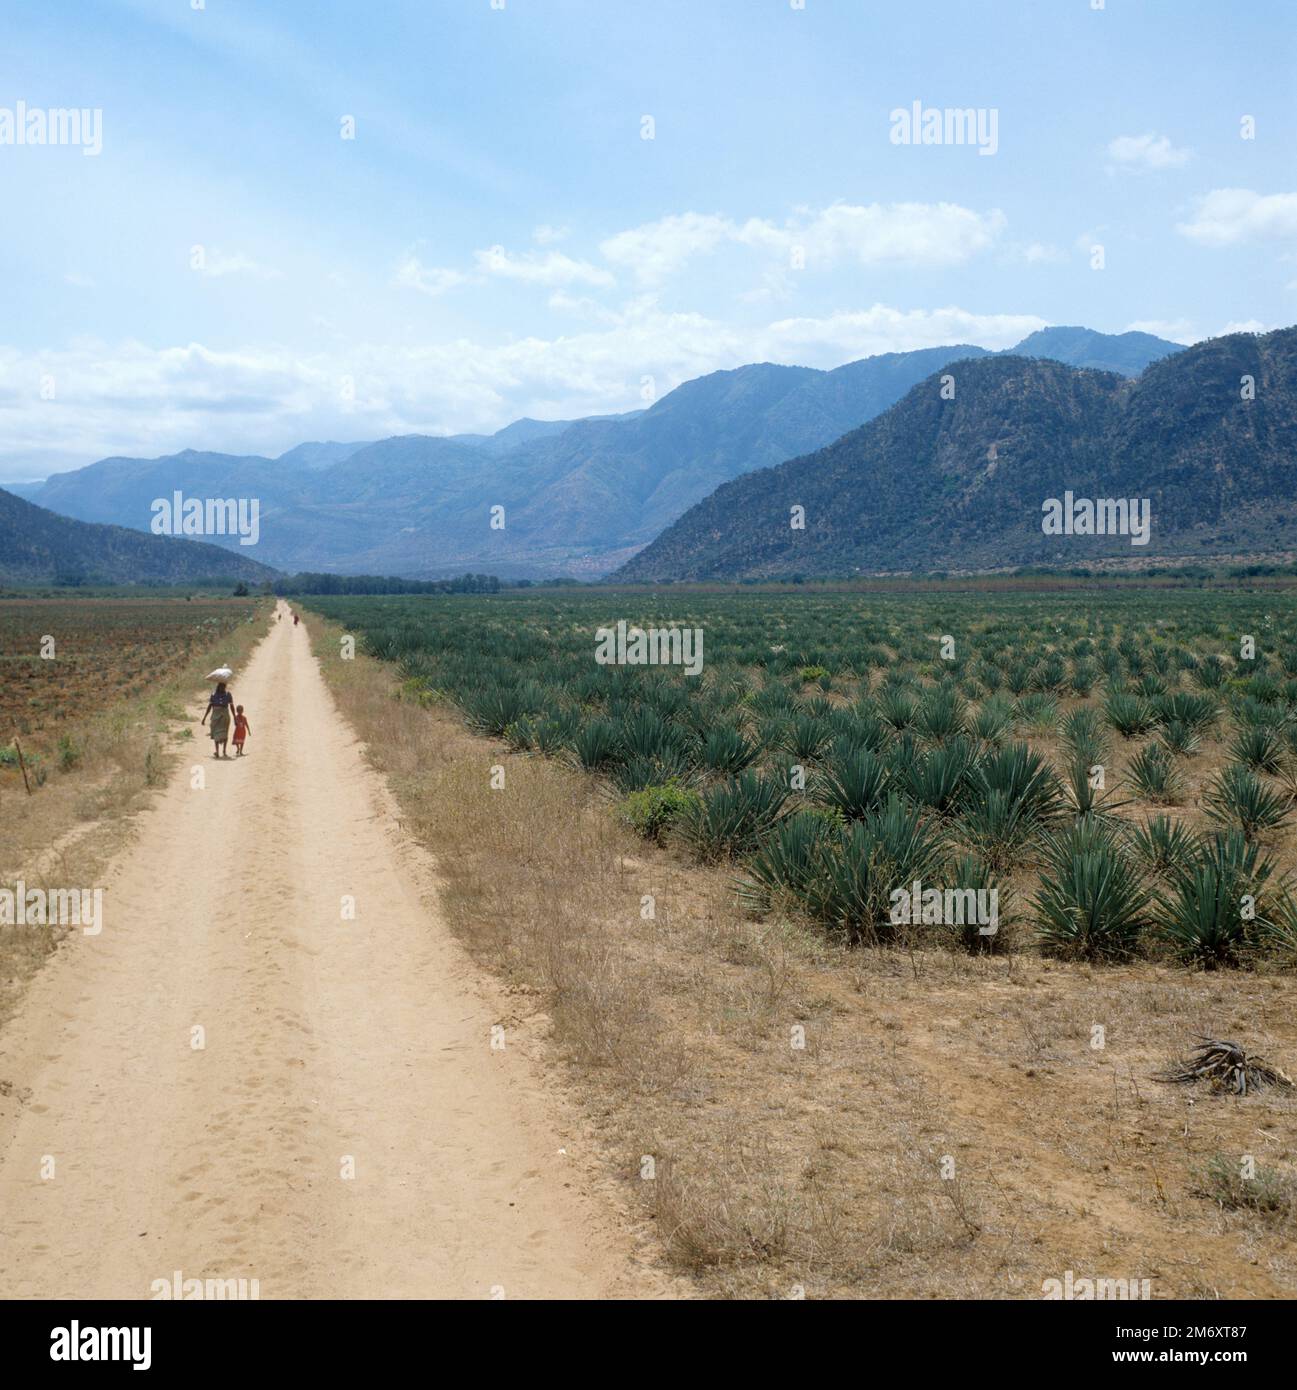 View of extensive young sisal (Agave sisalana) plantation with woman and child walking on a straight dust road and mountains behind, Tanzania Stock Photo